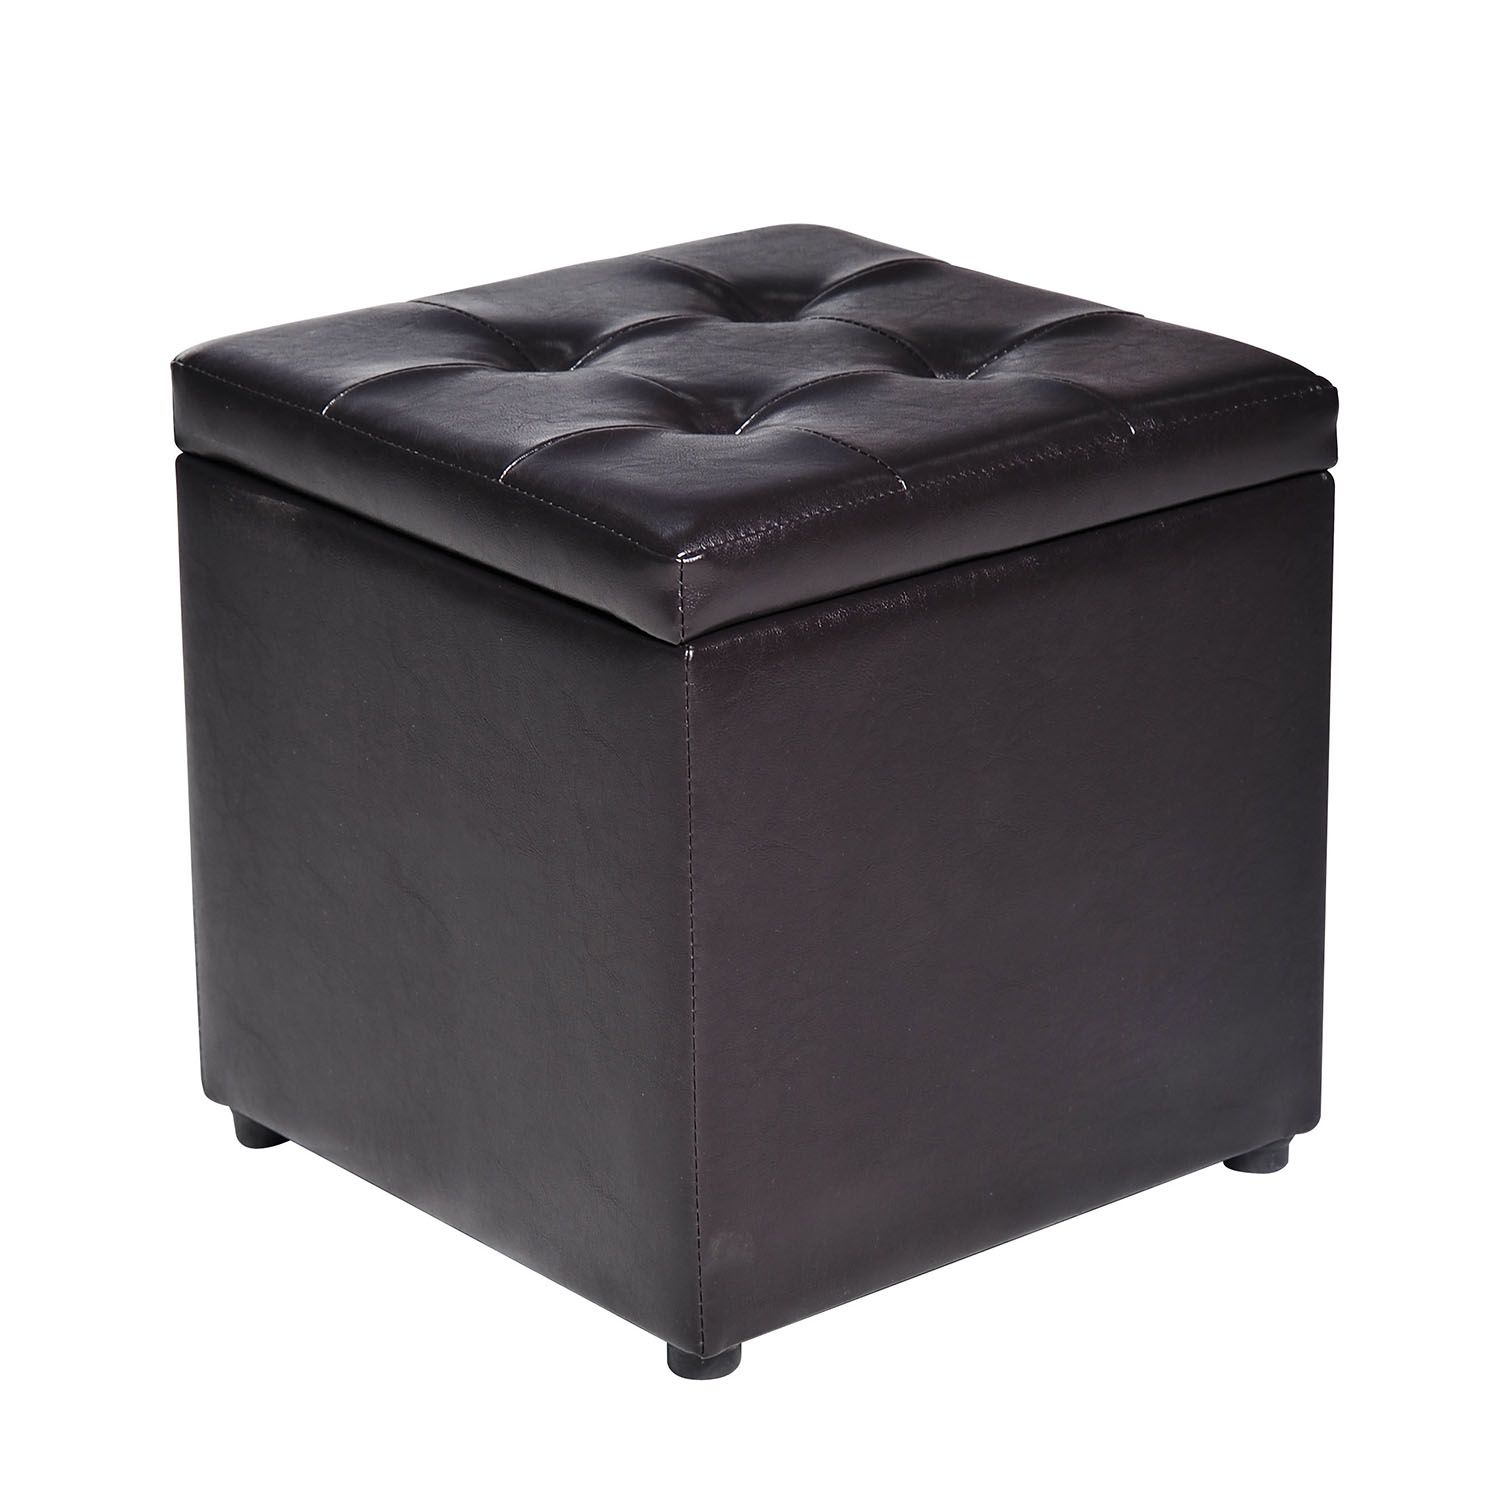 Homcom Faux Leather Foot Stool Storage Ottoman – Black With Regard To Black Faux Leather Storage Ottomans (View 10 of 20)